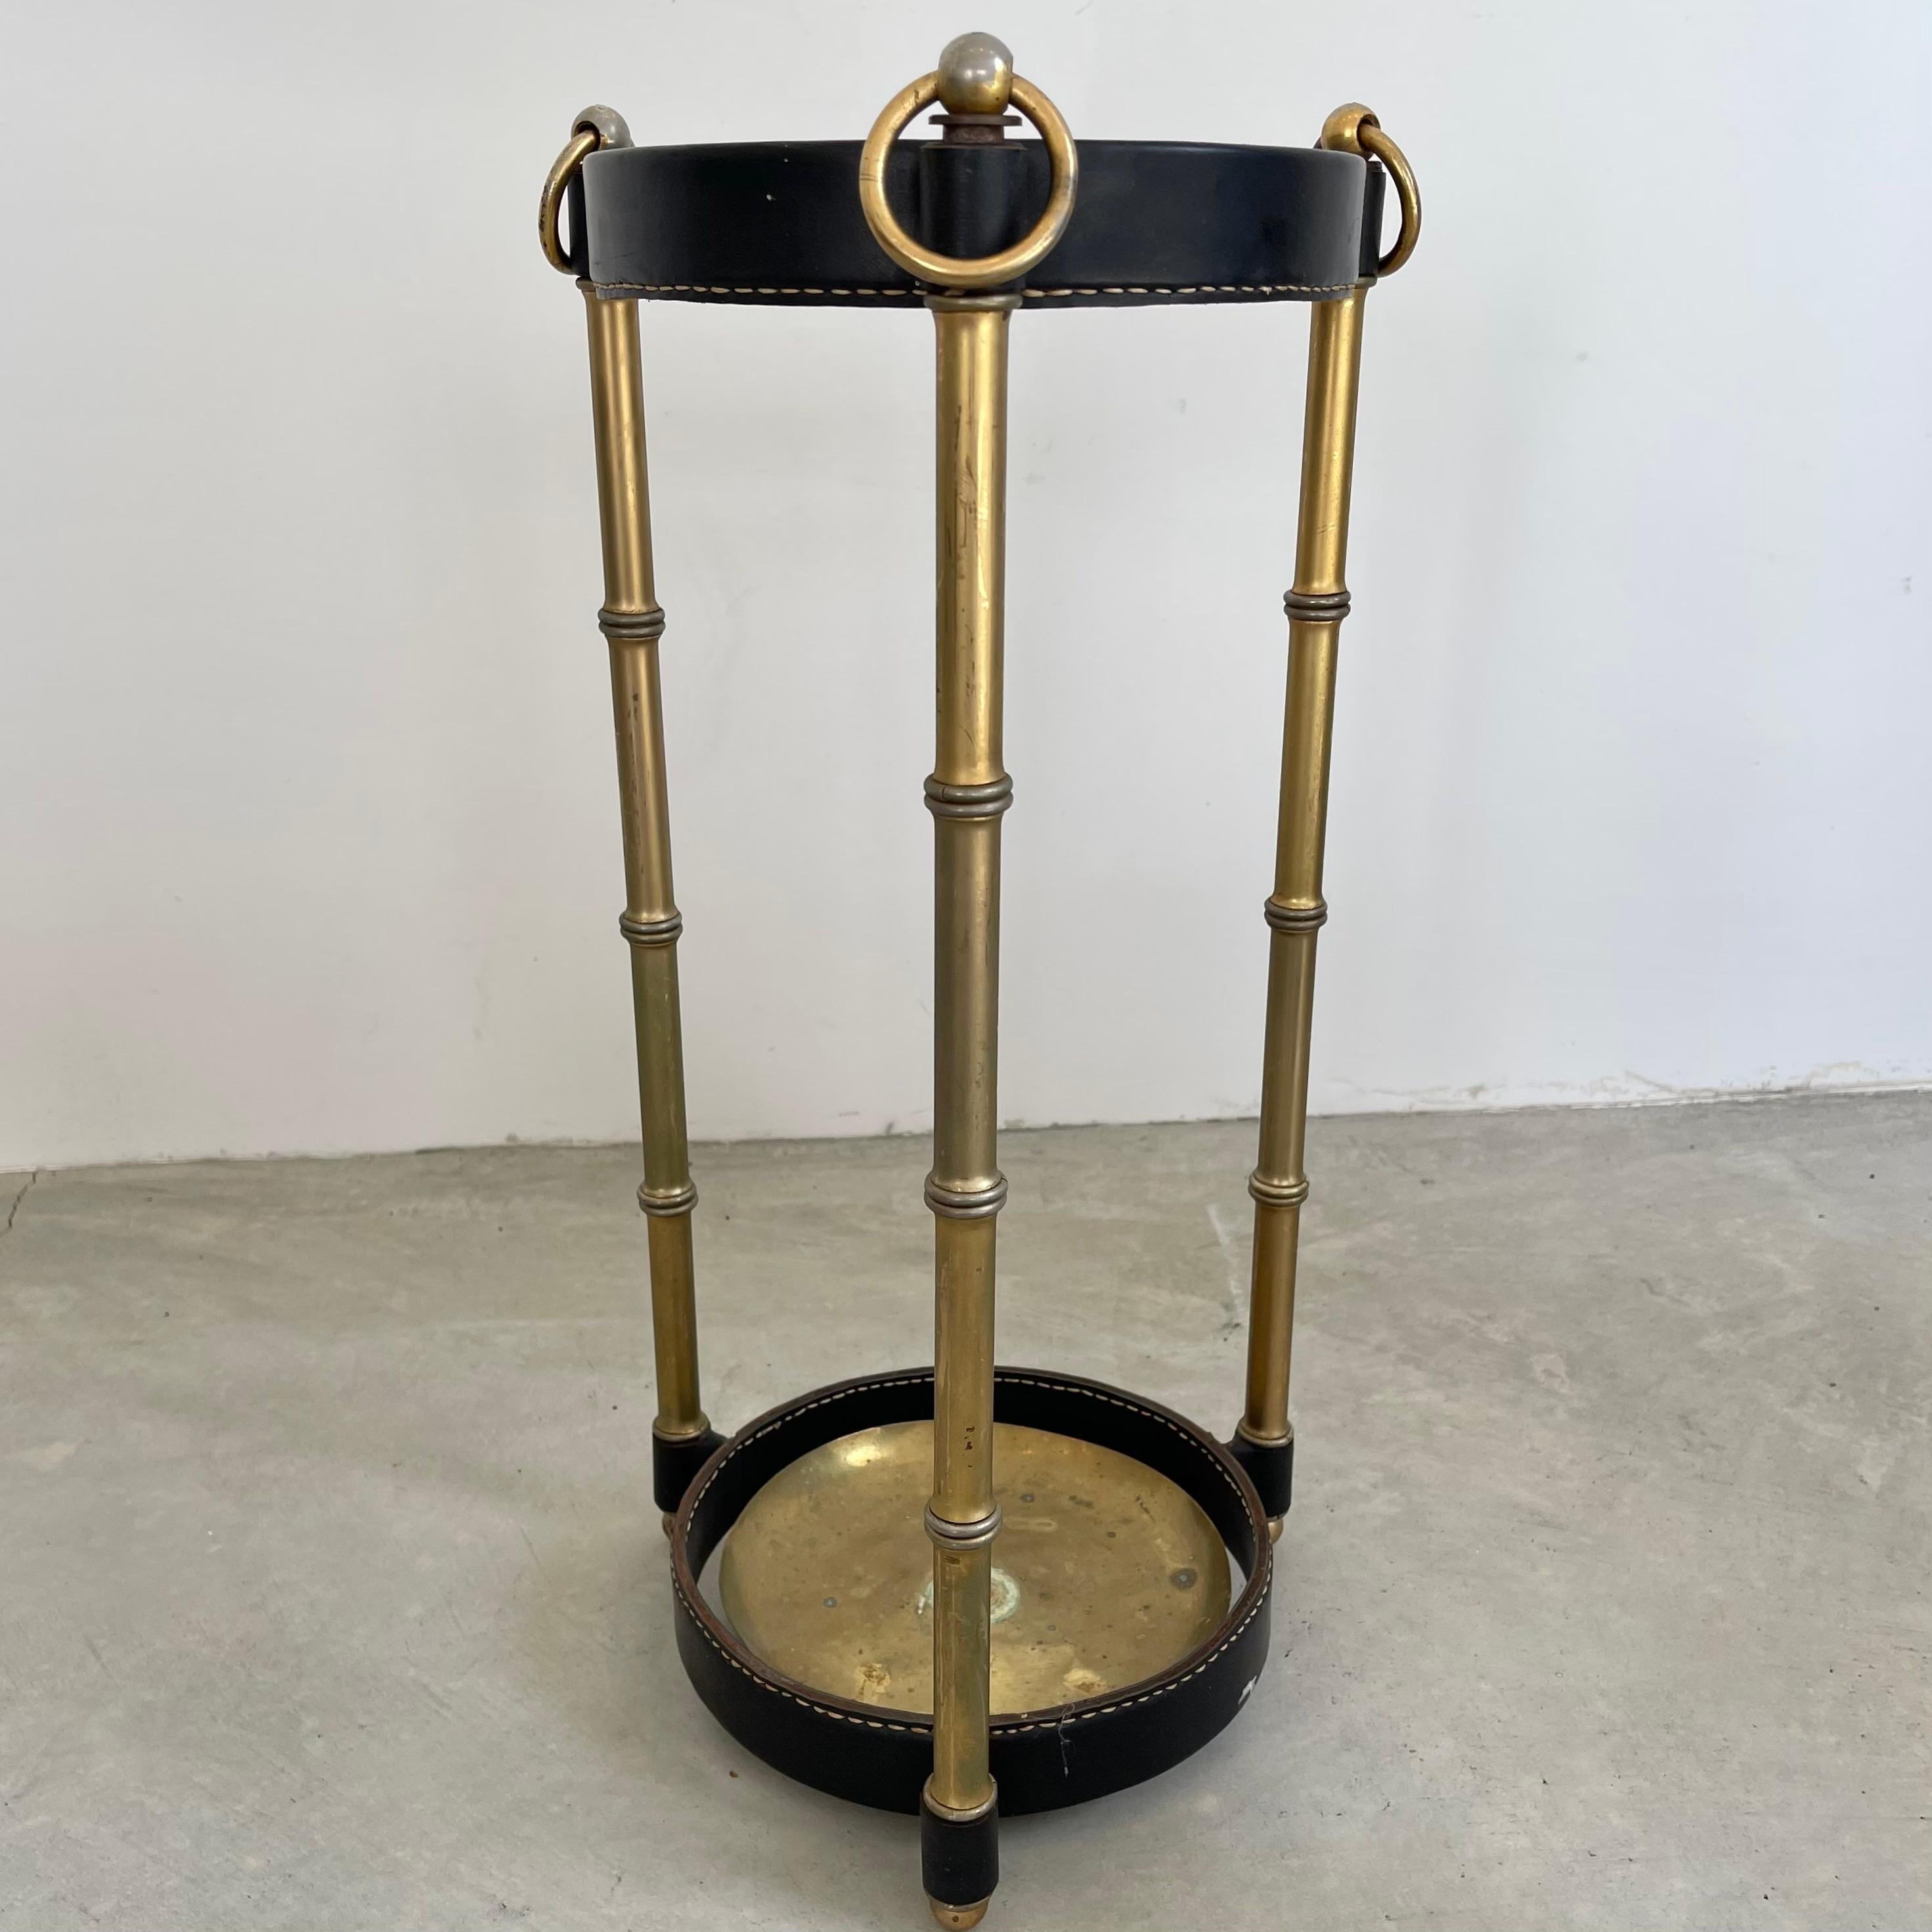 Art Deco Jacques Adnet Leather and Brass Umbrella Stand, 1950s For Sale